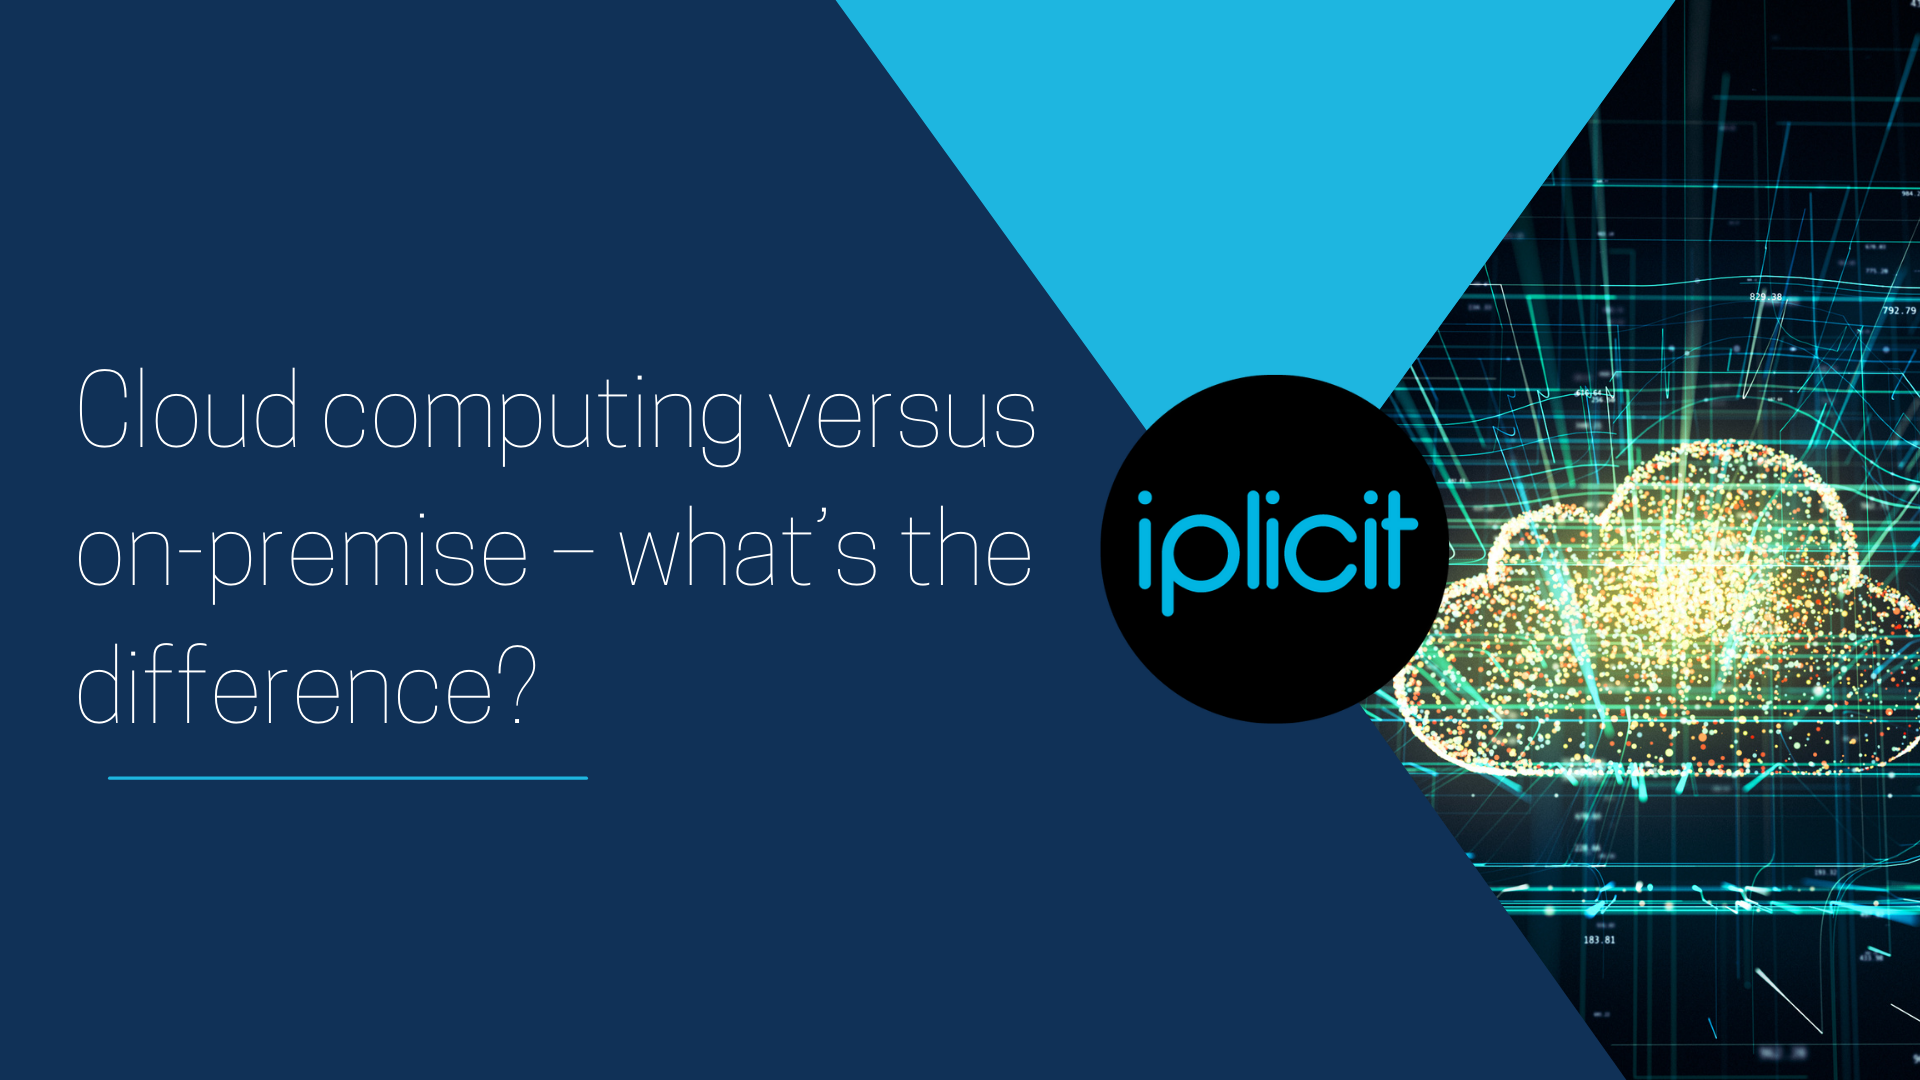 Cloud computing versus on-premise – what’s the difference?